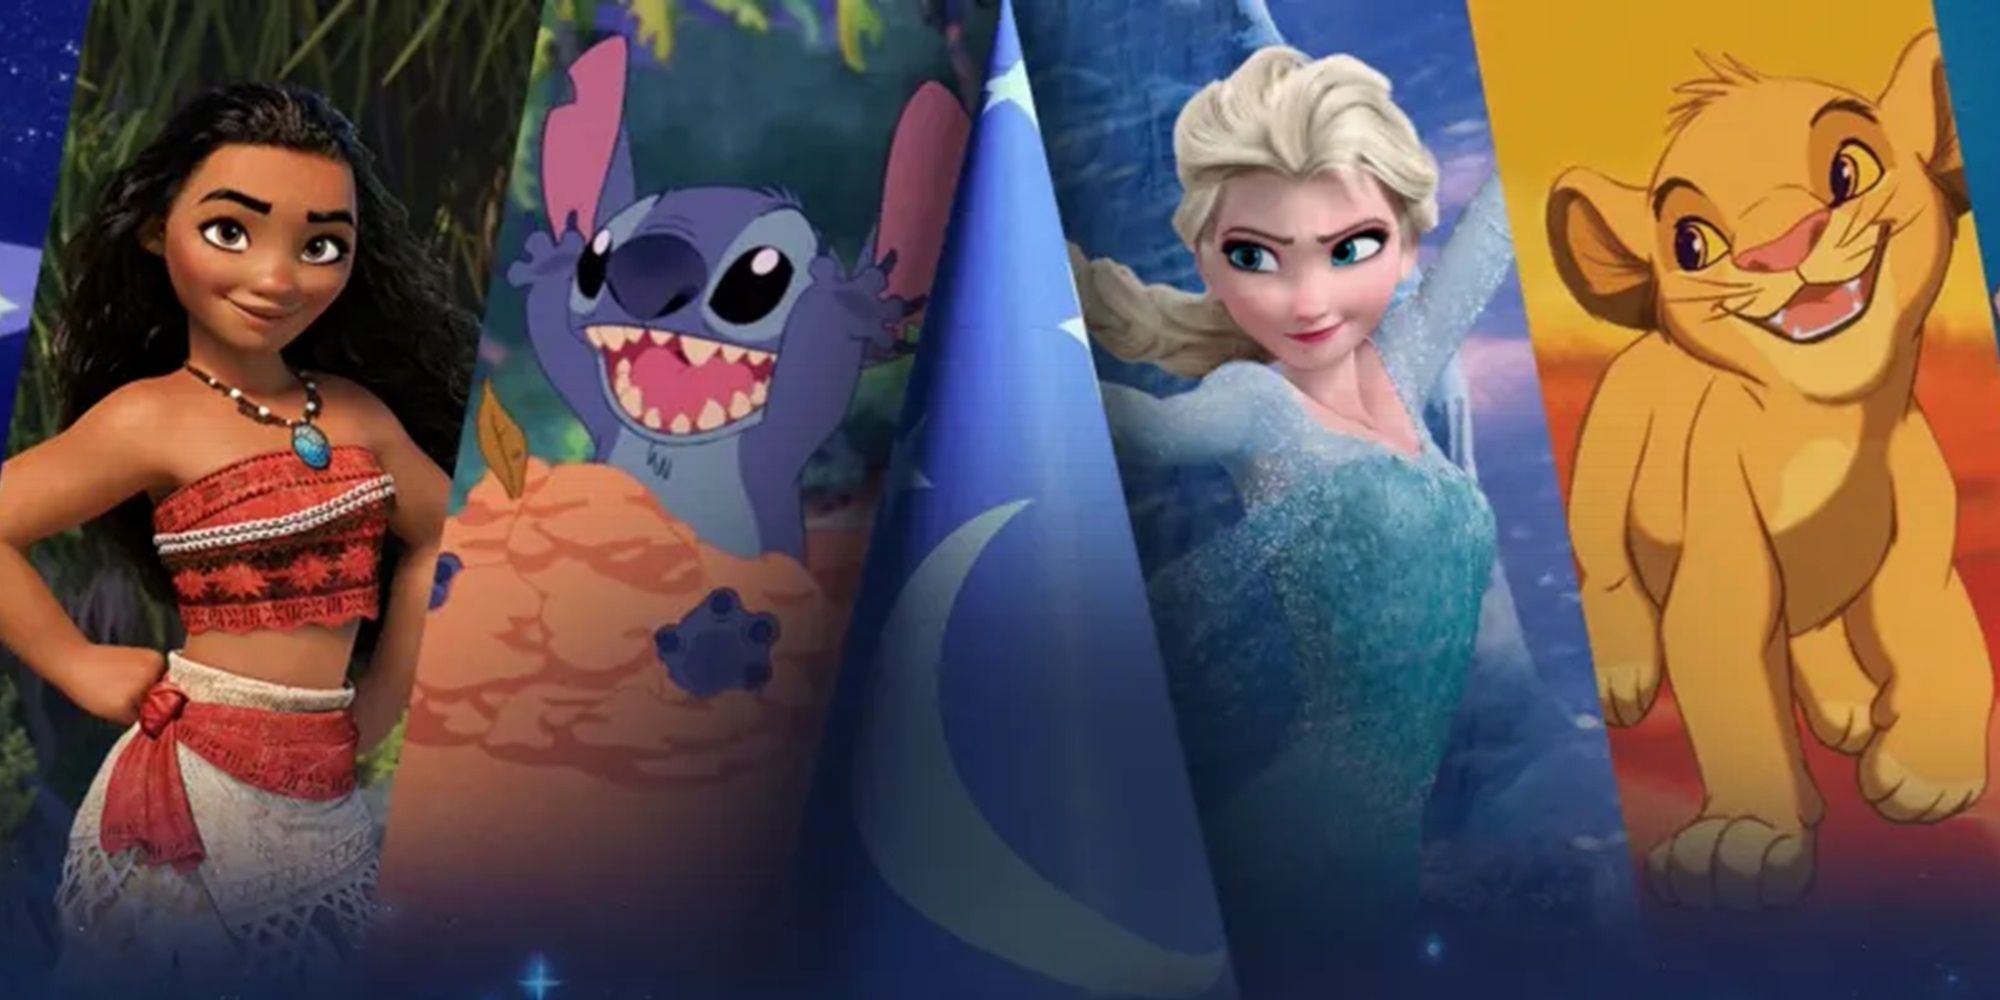 Rotten Tomatoes Crowns $1Bn Hit As The Best Disney Animated Movie & I Do Not Agree